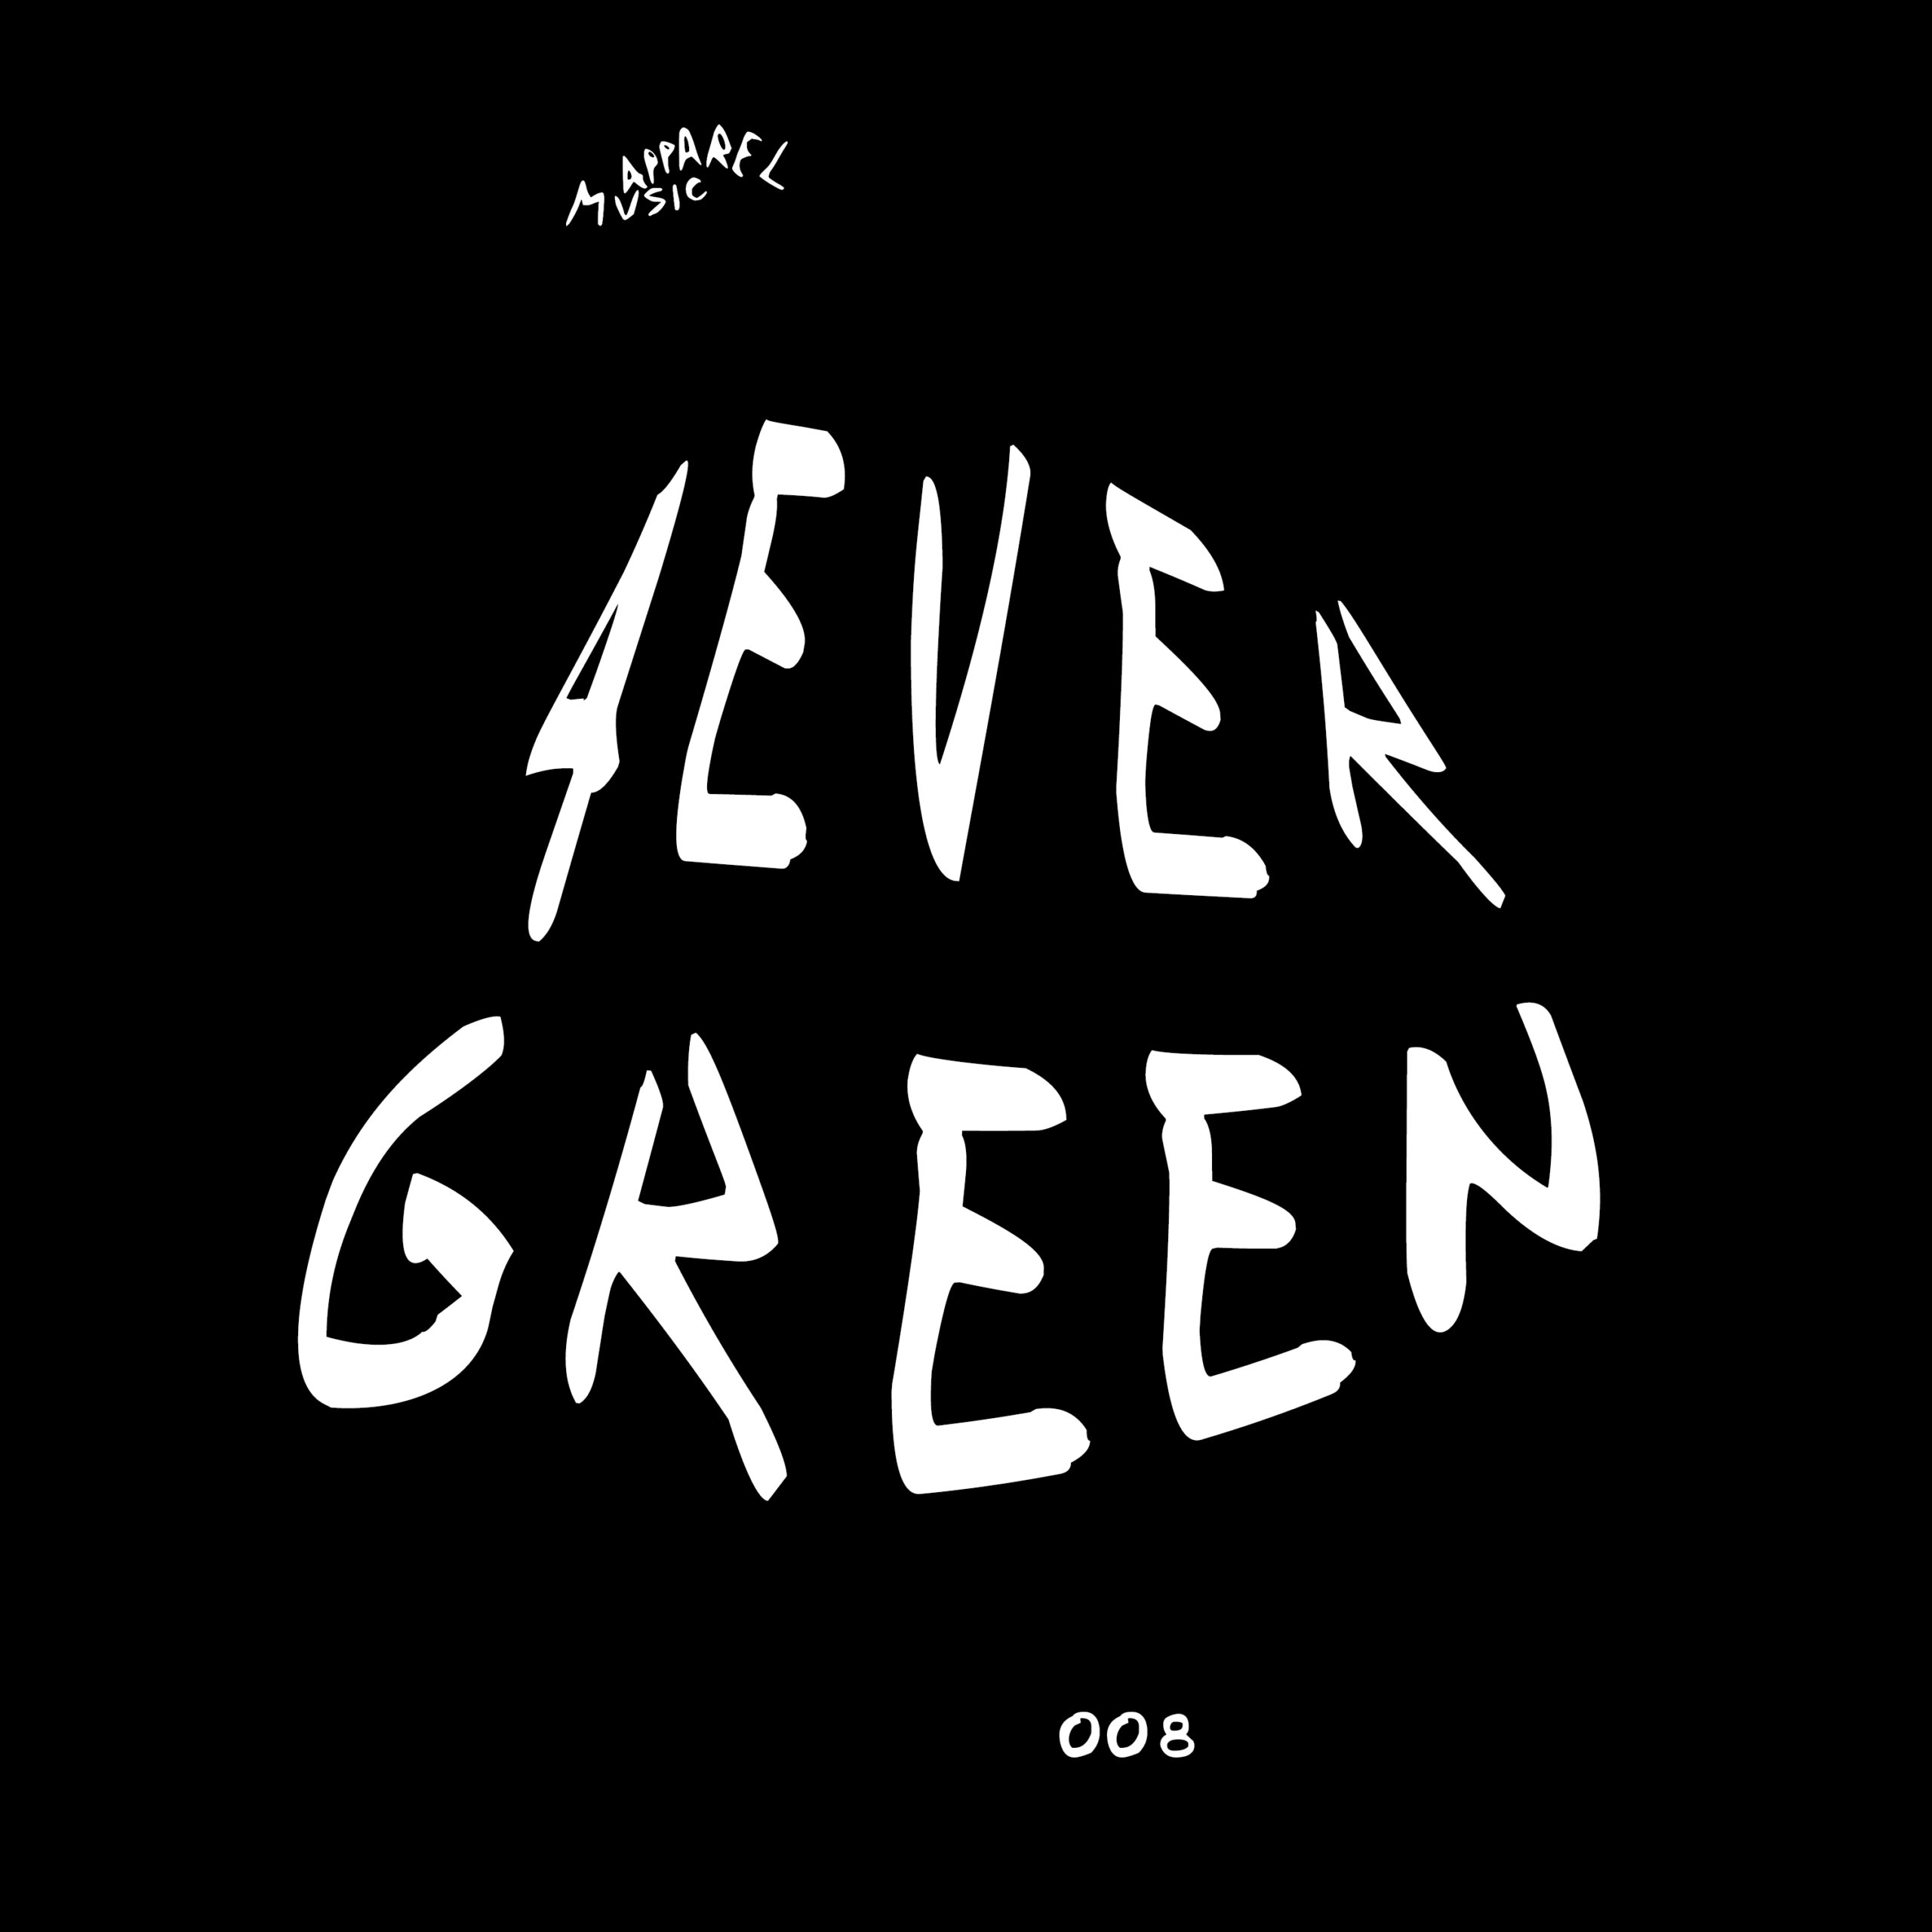 Out now ‘4evergreen 008’ by Various Artists